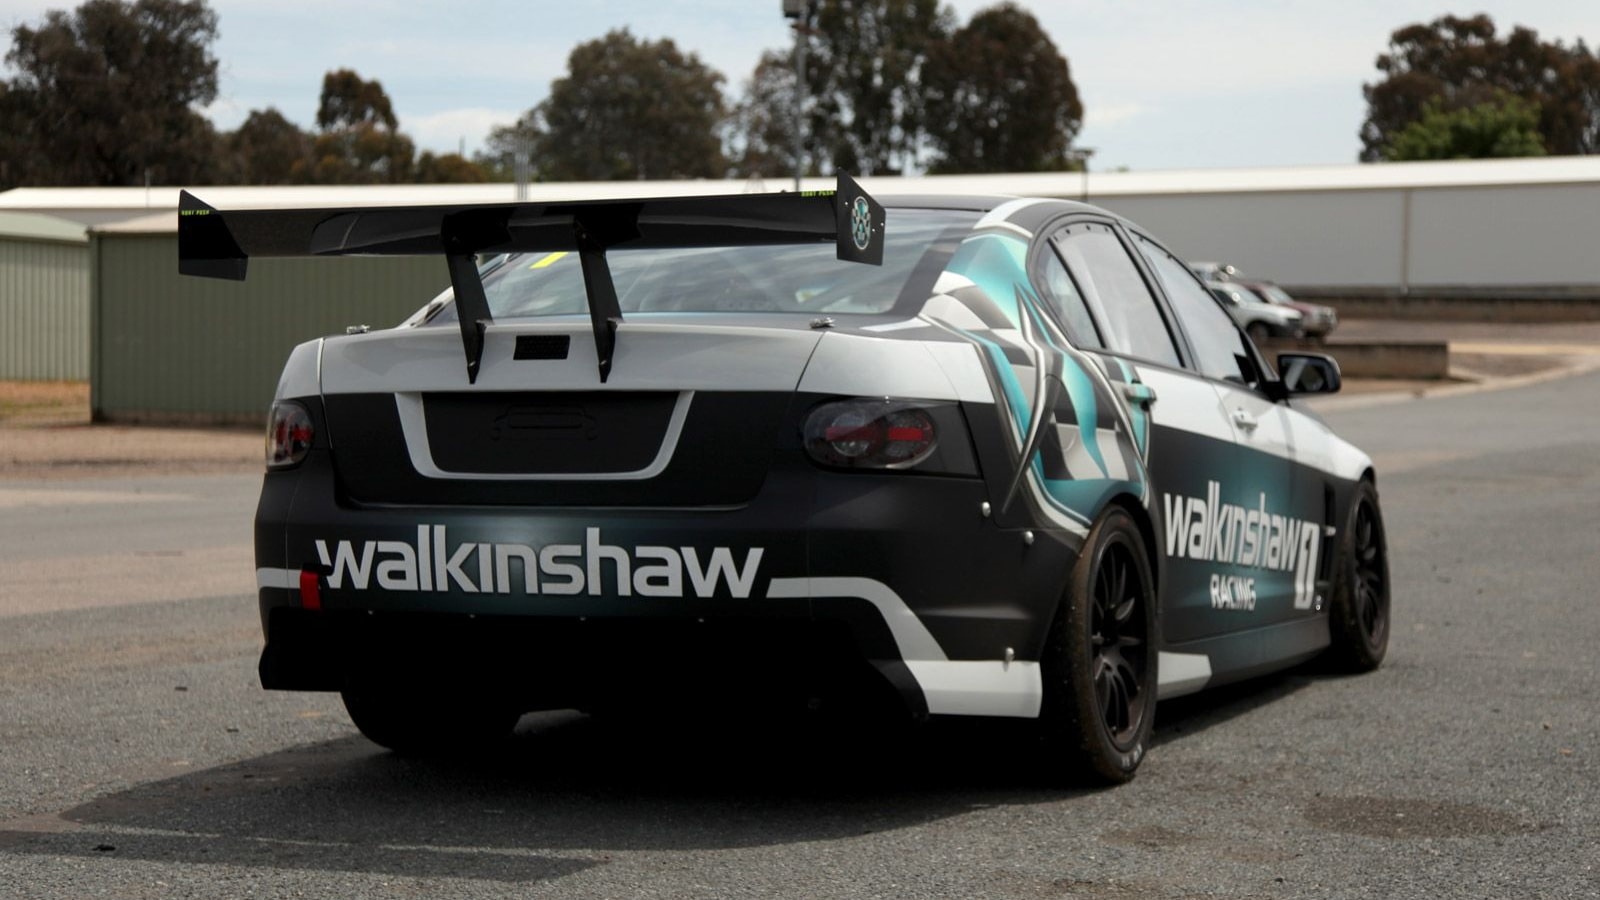 HSV ClubSport R8 race car based on the Holden Commodore